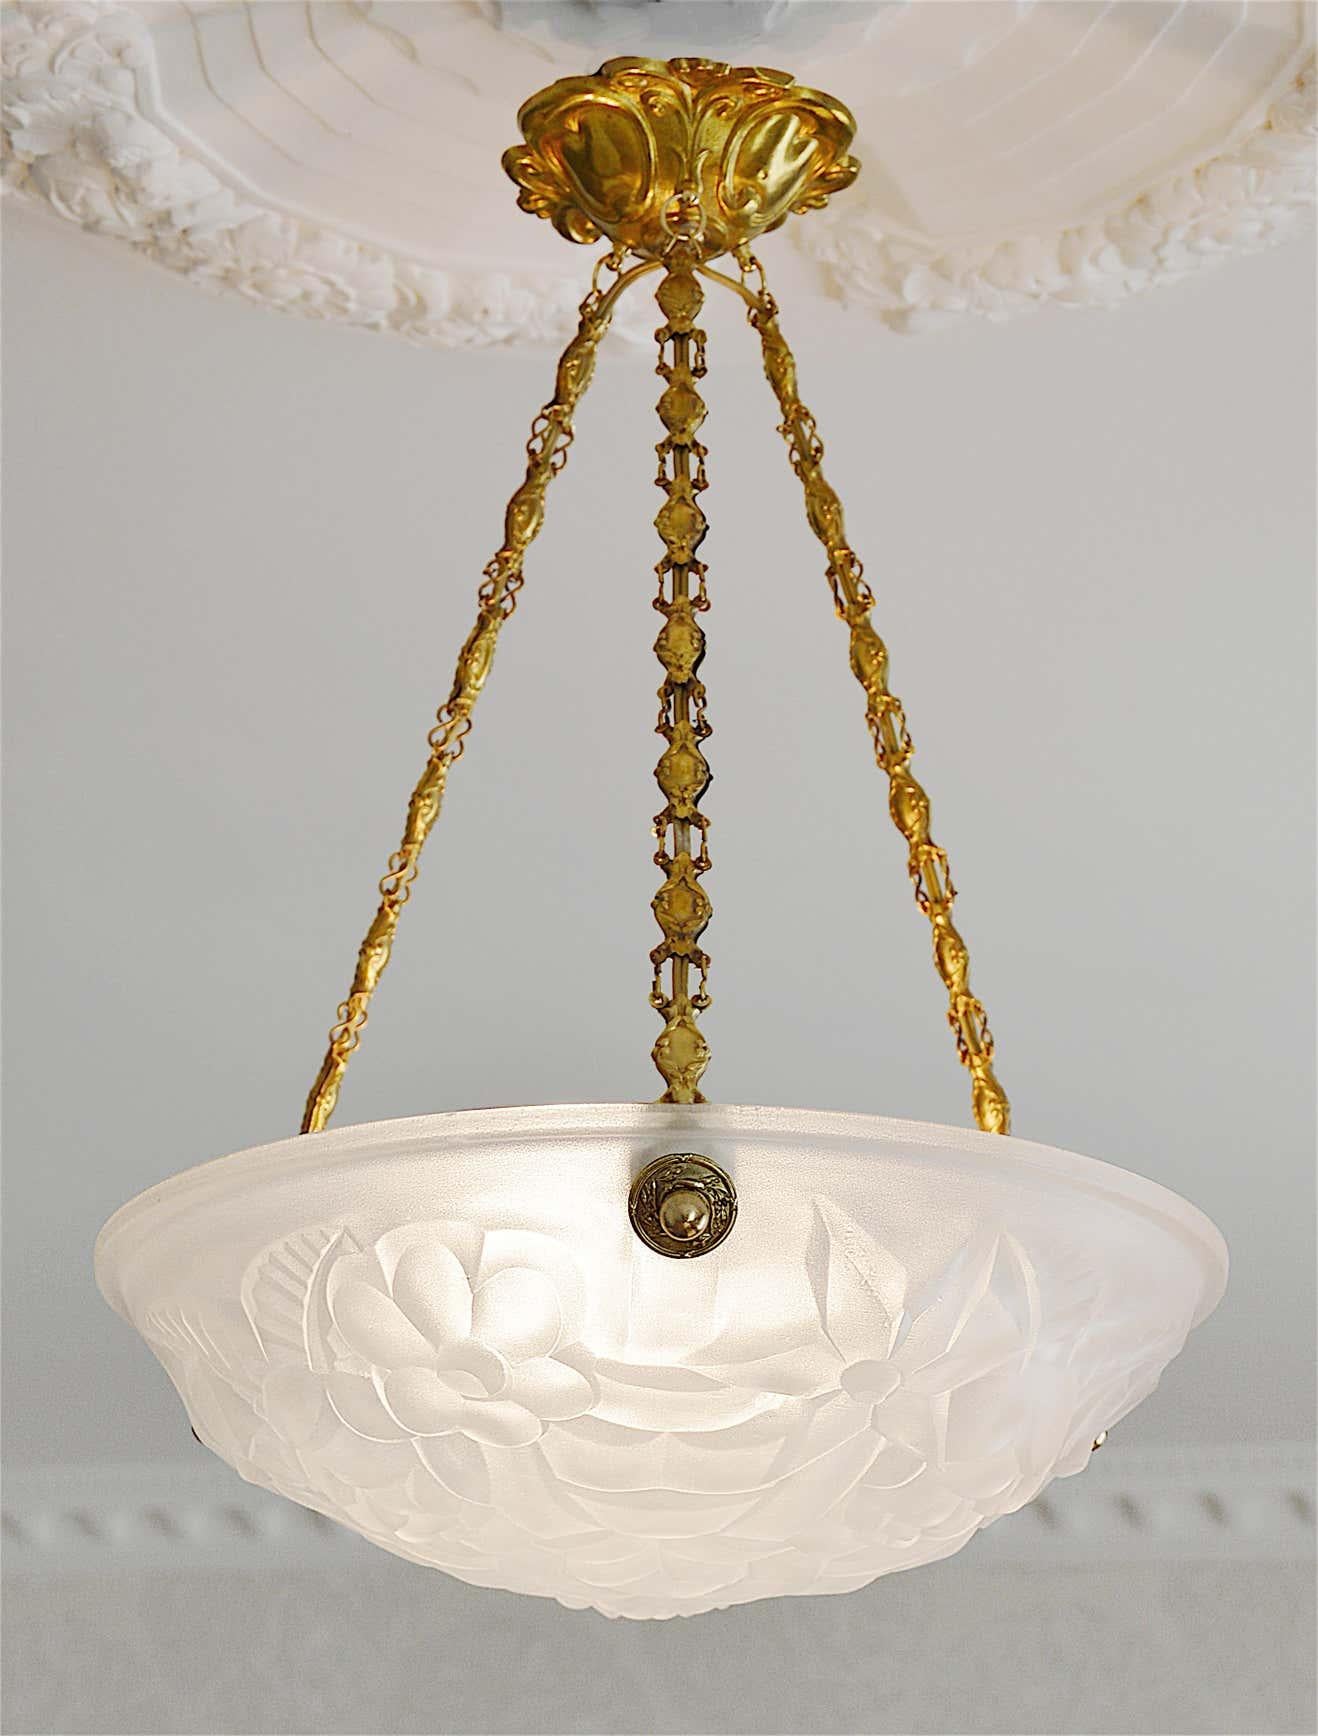 Frosted Degue French Art Deco Pair of Pendant Chandeliers, Late 1920s